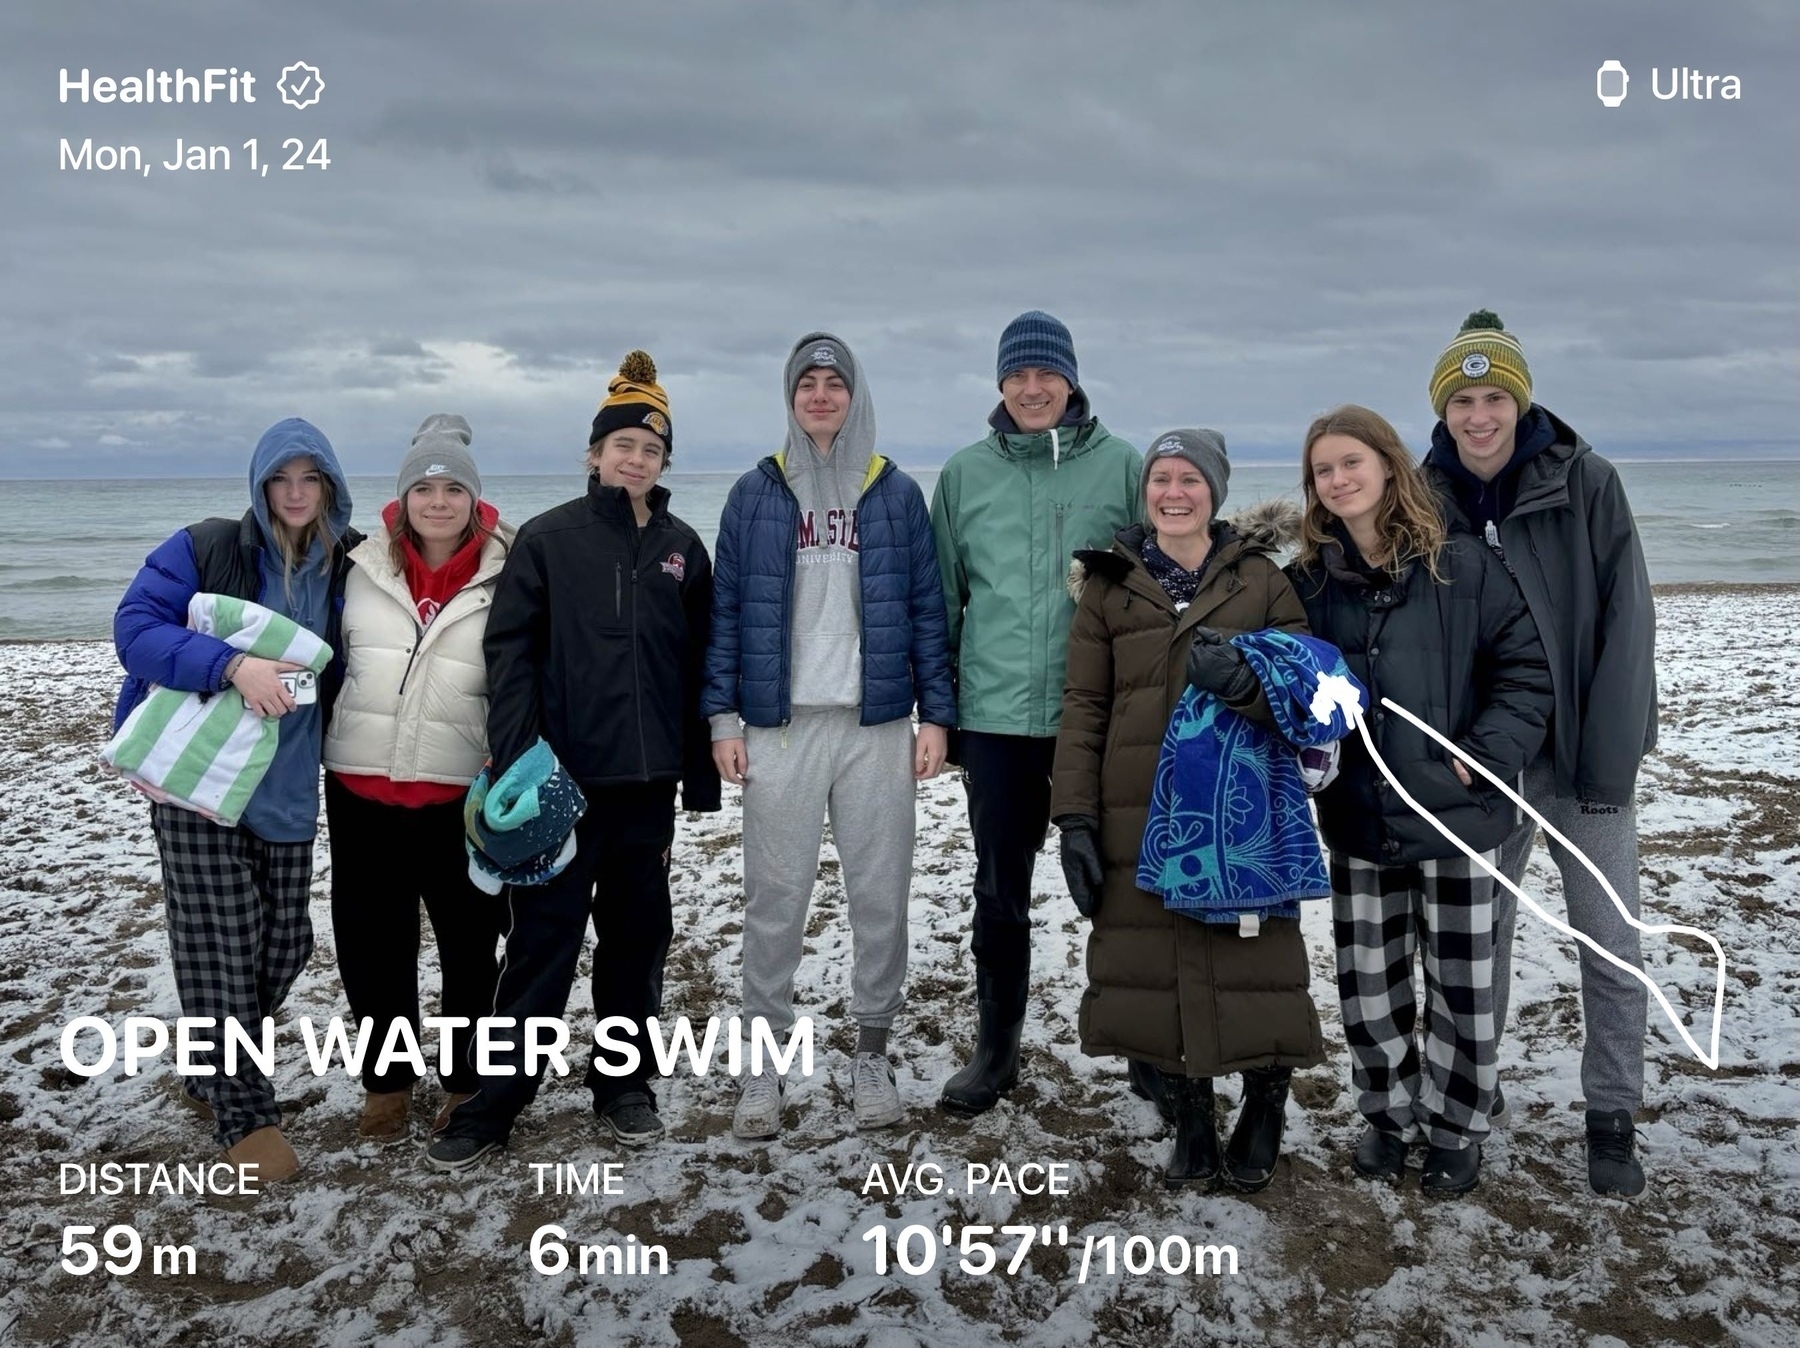 Group of people standing in front of a lake. All bundled up and getting ready for a swim